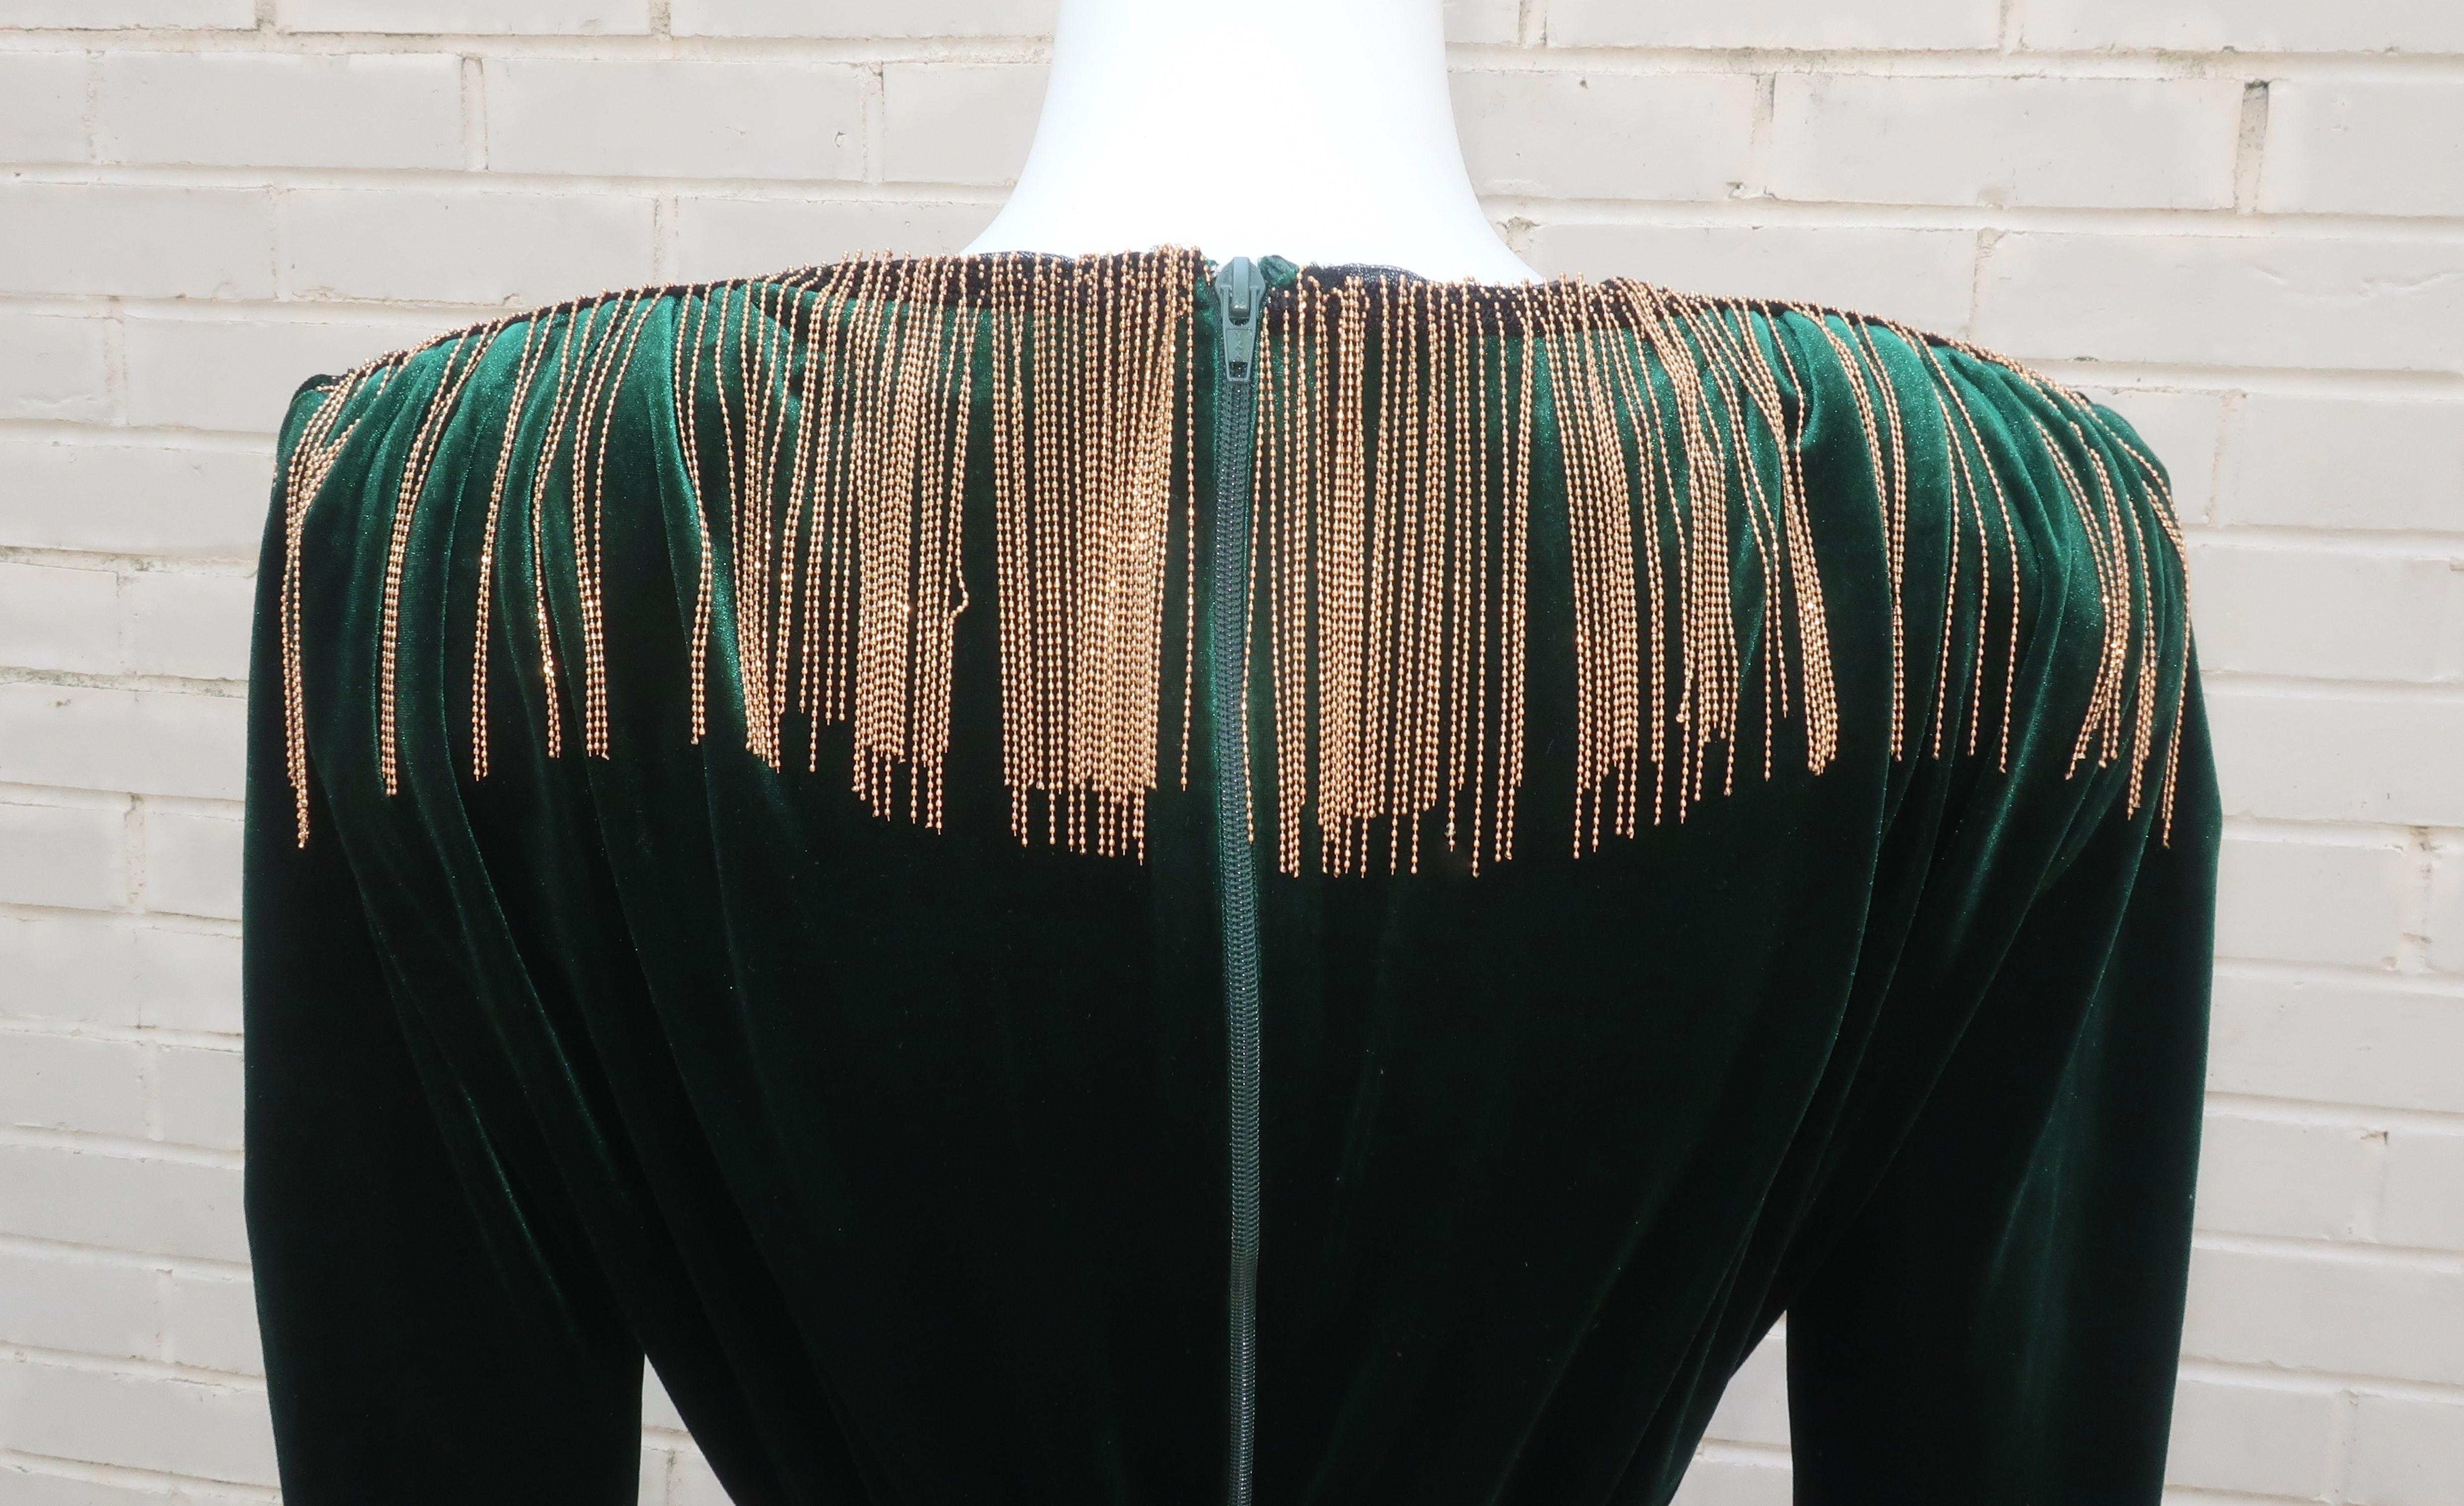 Bronx and Banco Emerald Green Velvet Evening Dress With Gold Bead ...